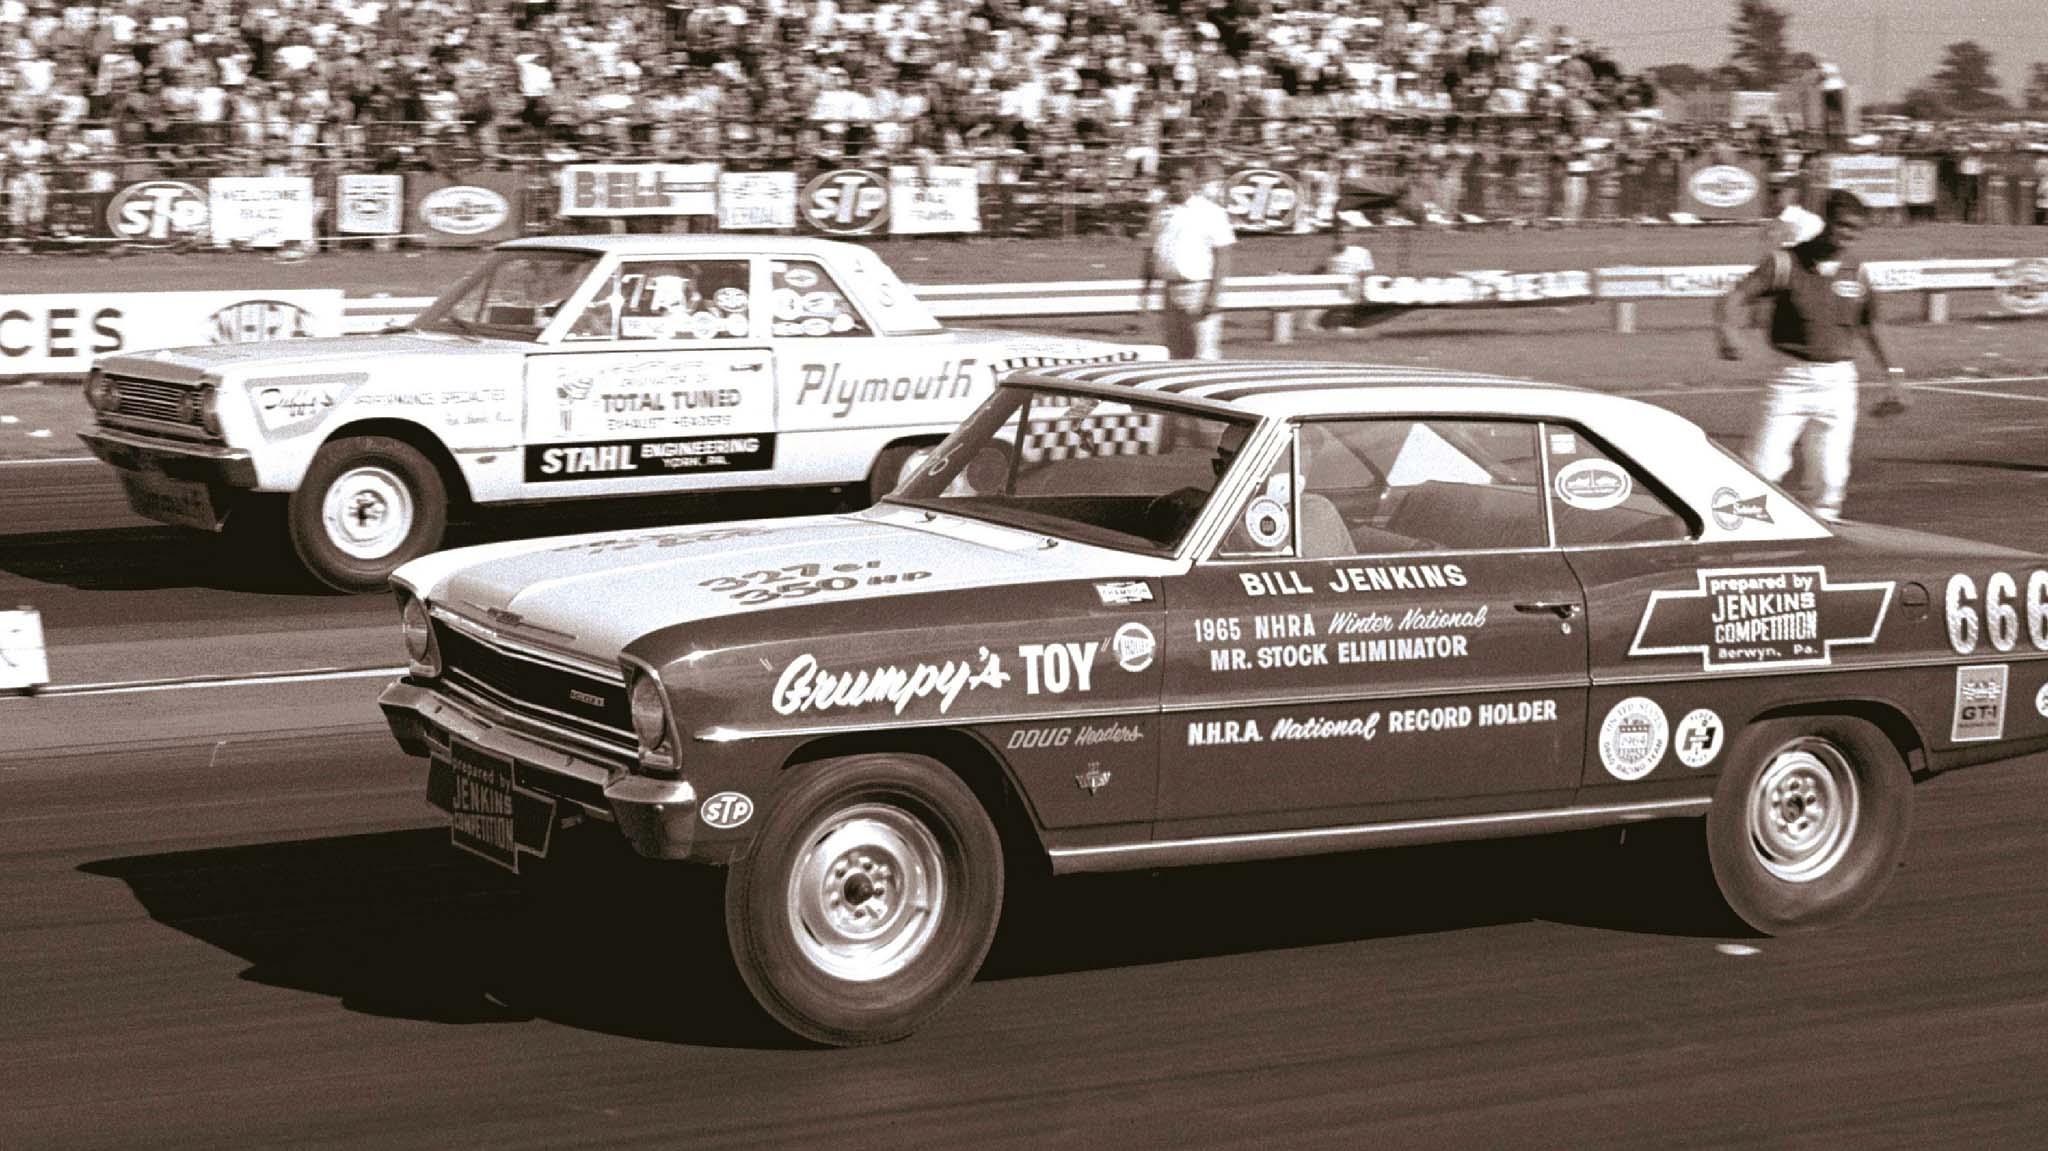 The Greatest Drag Racing Rivalry of 1966